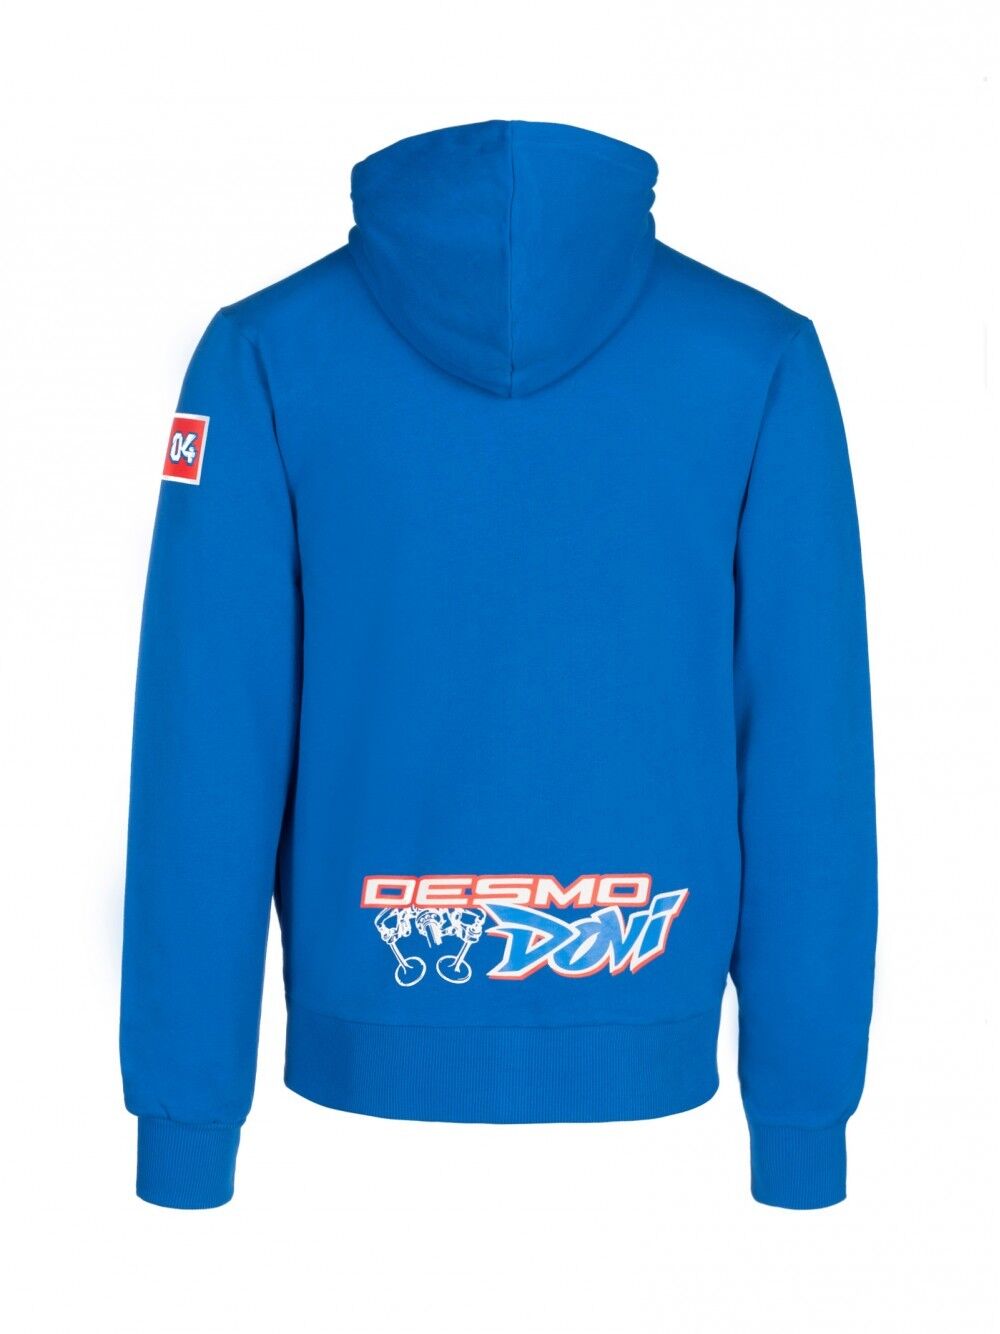 Andrea Dovizioso Official 04 Hoodie - 18 22201